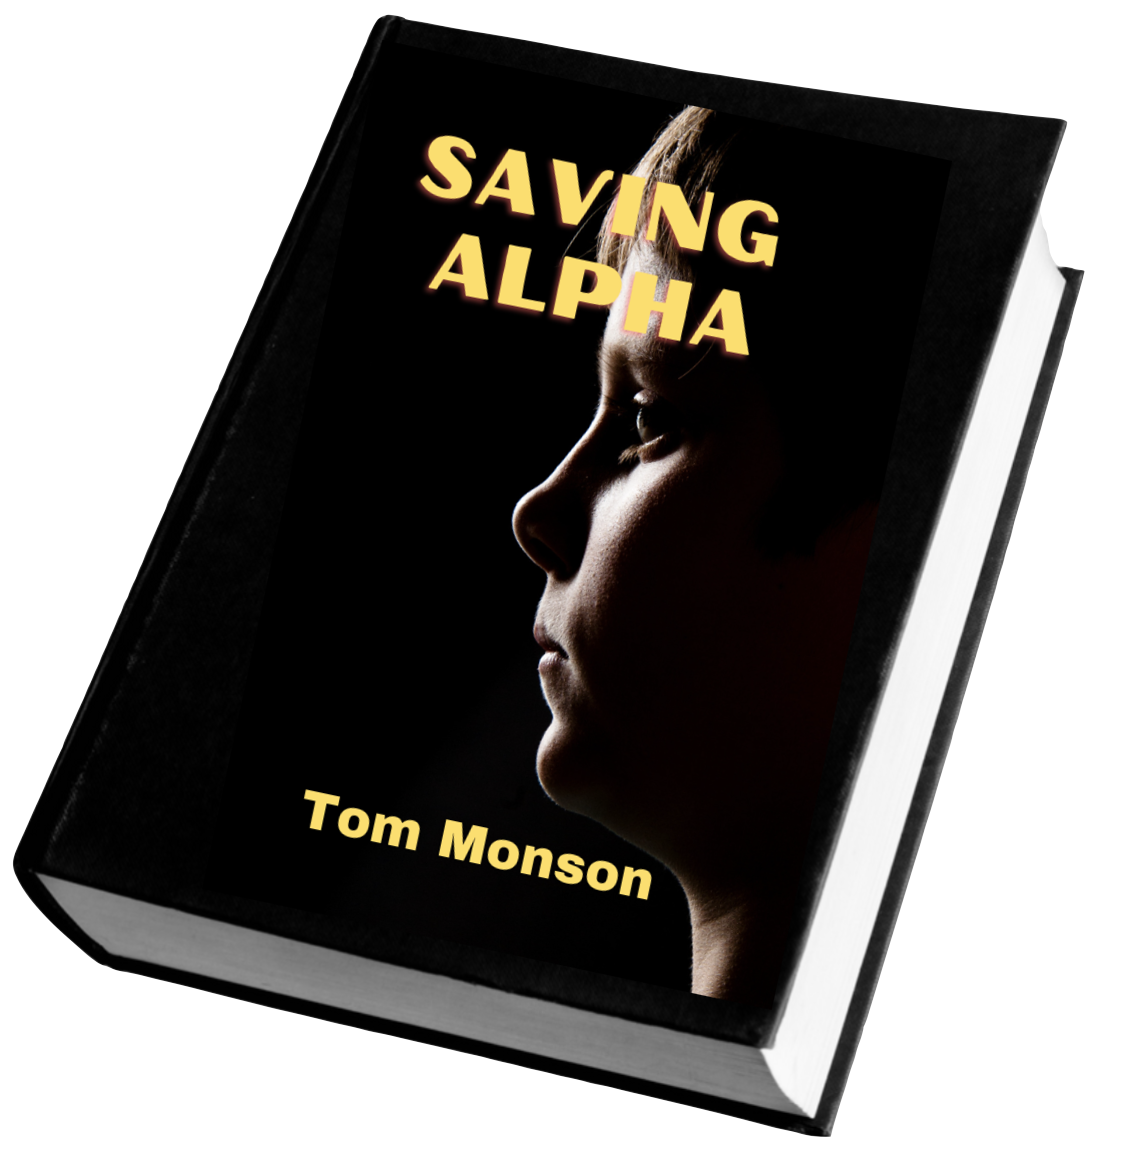 Saving Alpha is a call to action.